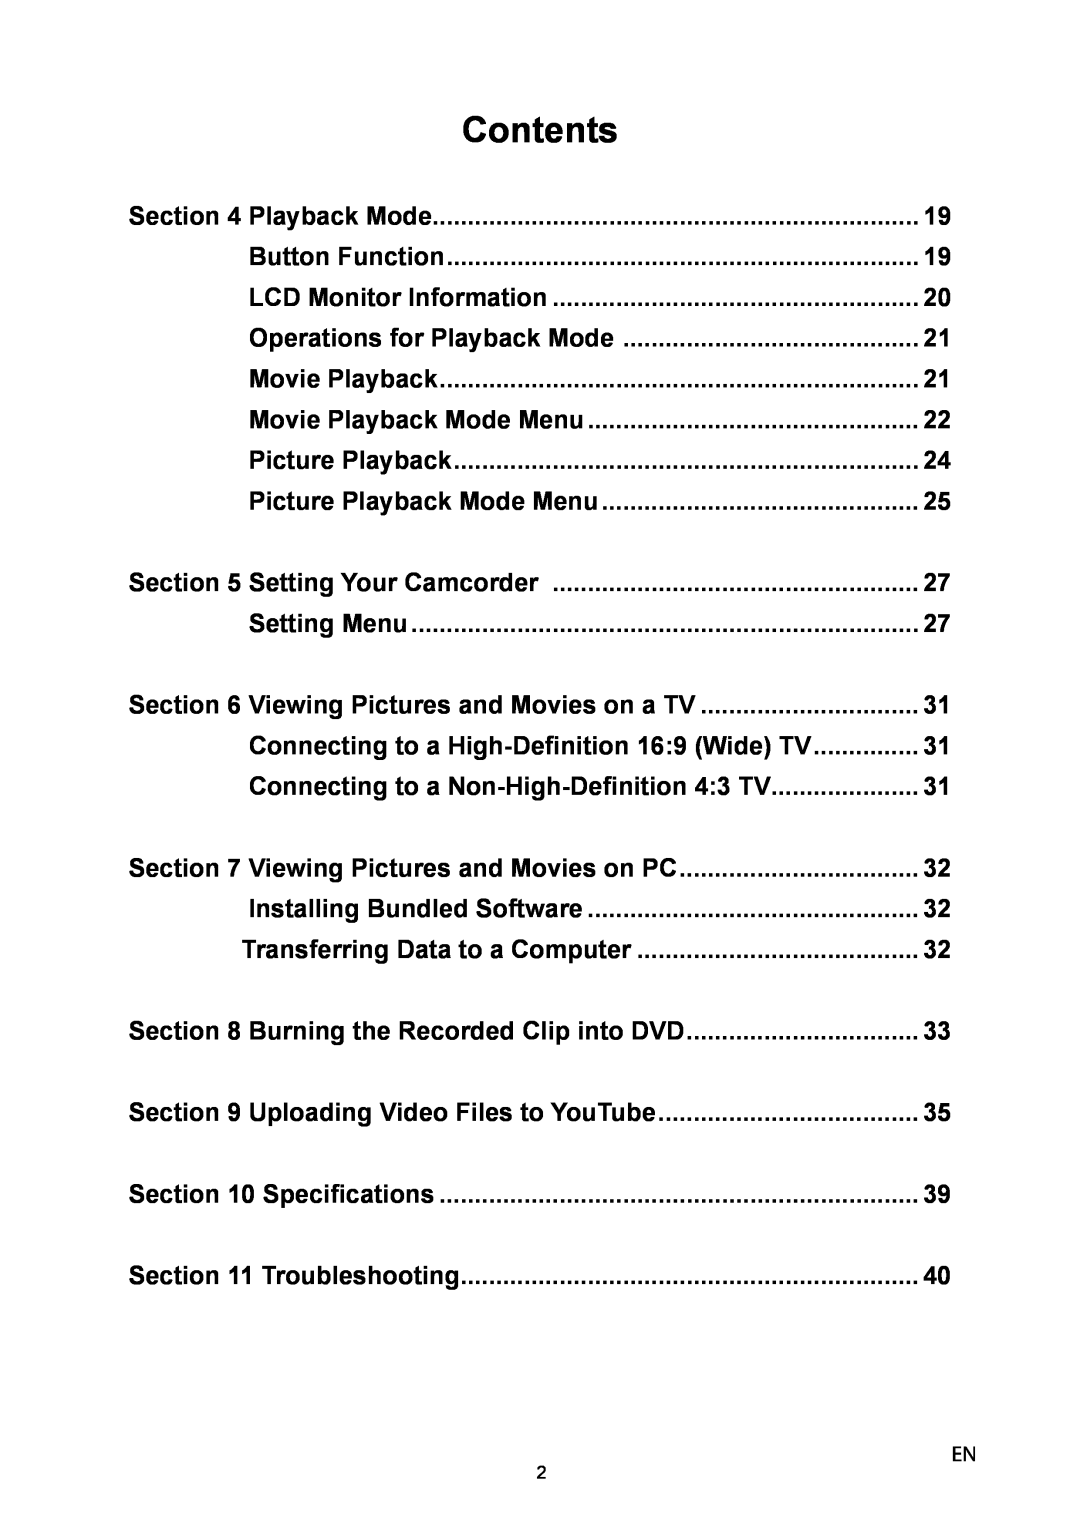 Toshiba P10 user manual Contents, Setting Your Camcorder 